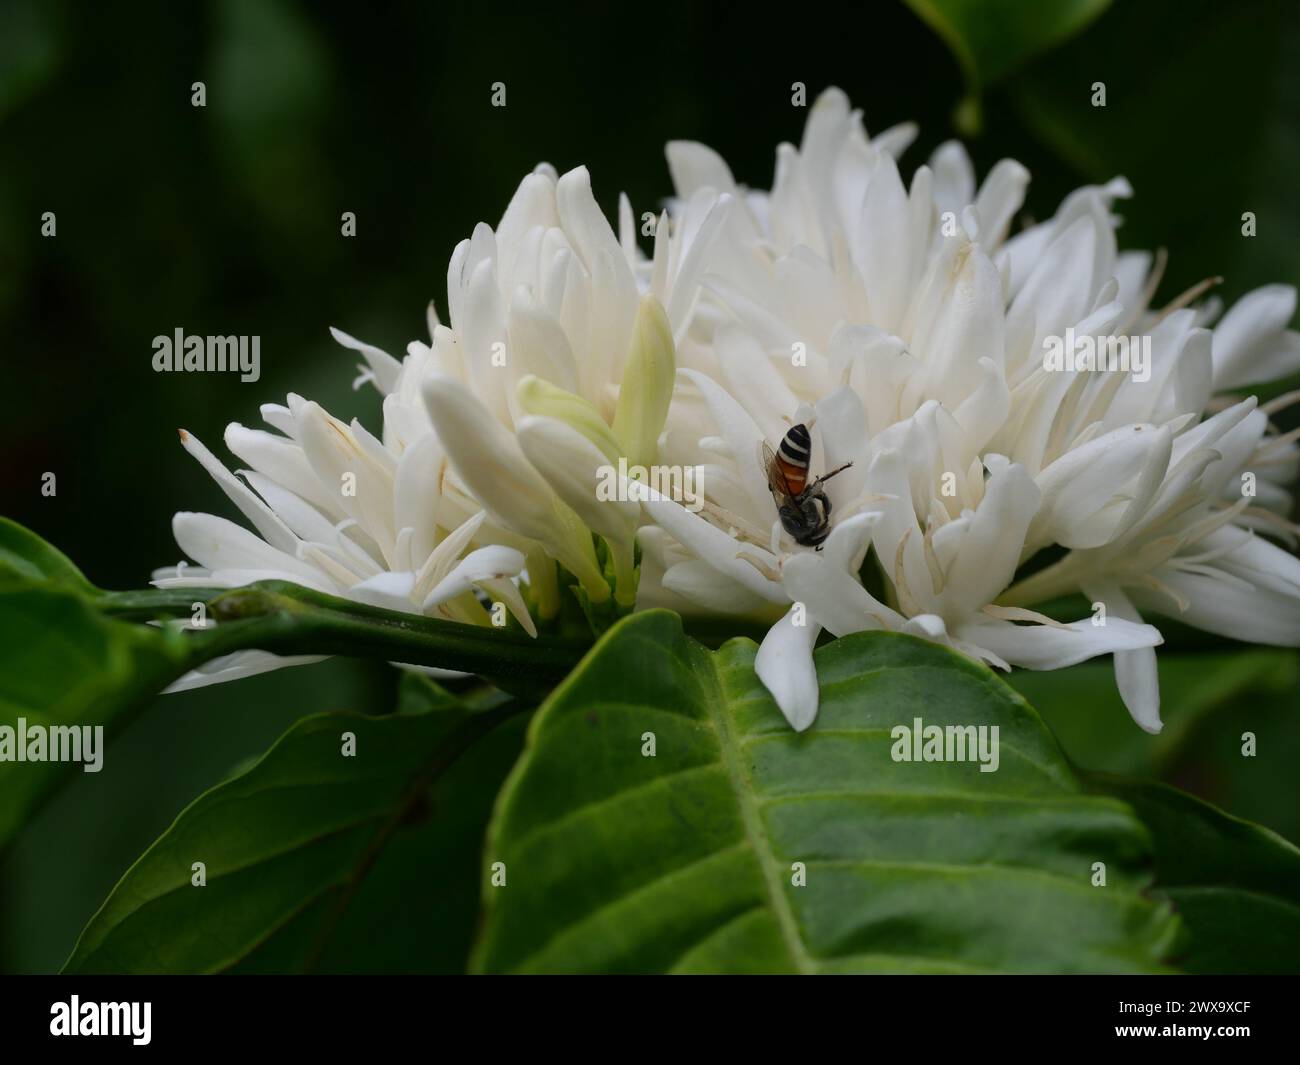 Red dwarf Honey bee on Robusta coffee blossom on tree plant with green leaf with black color in background. Petals and white stamens Stock Photo